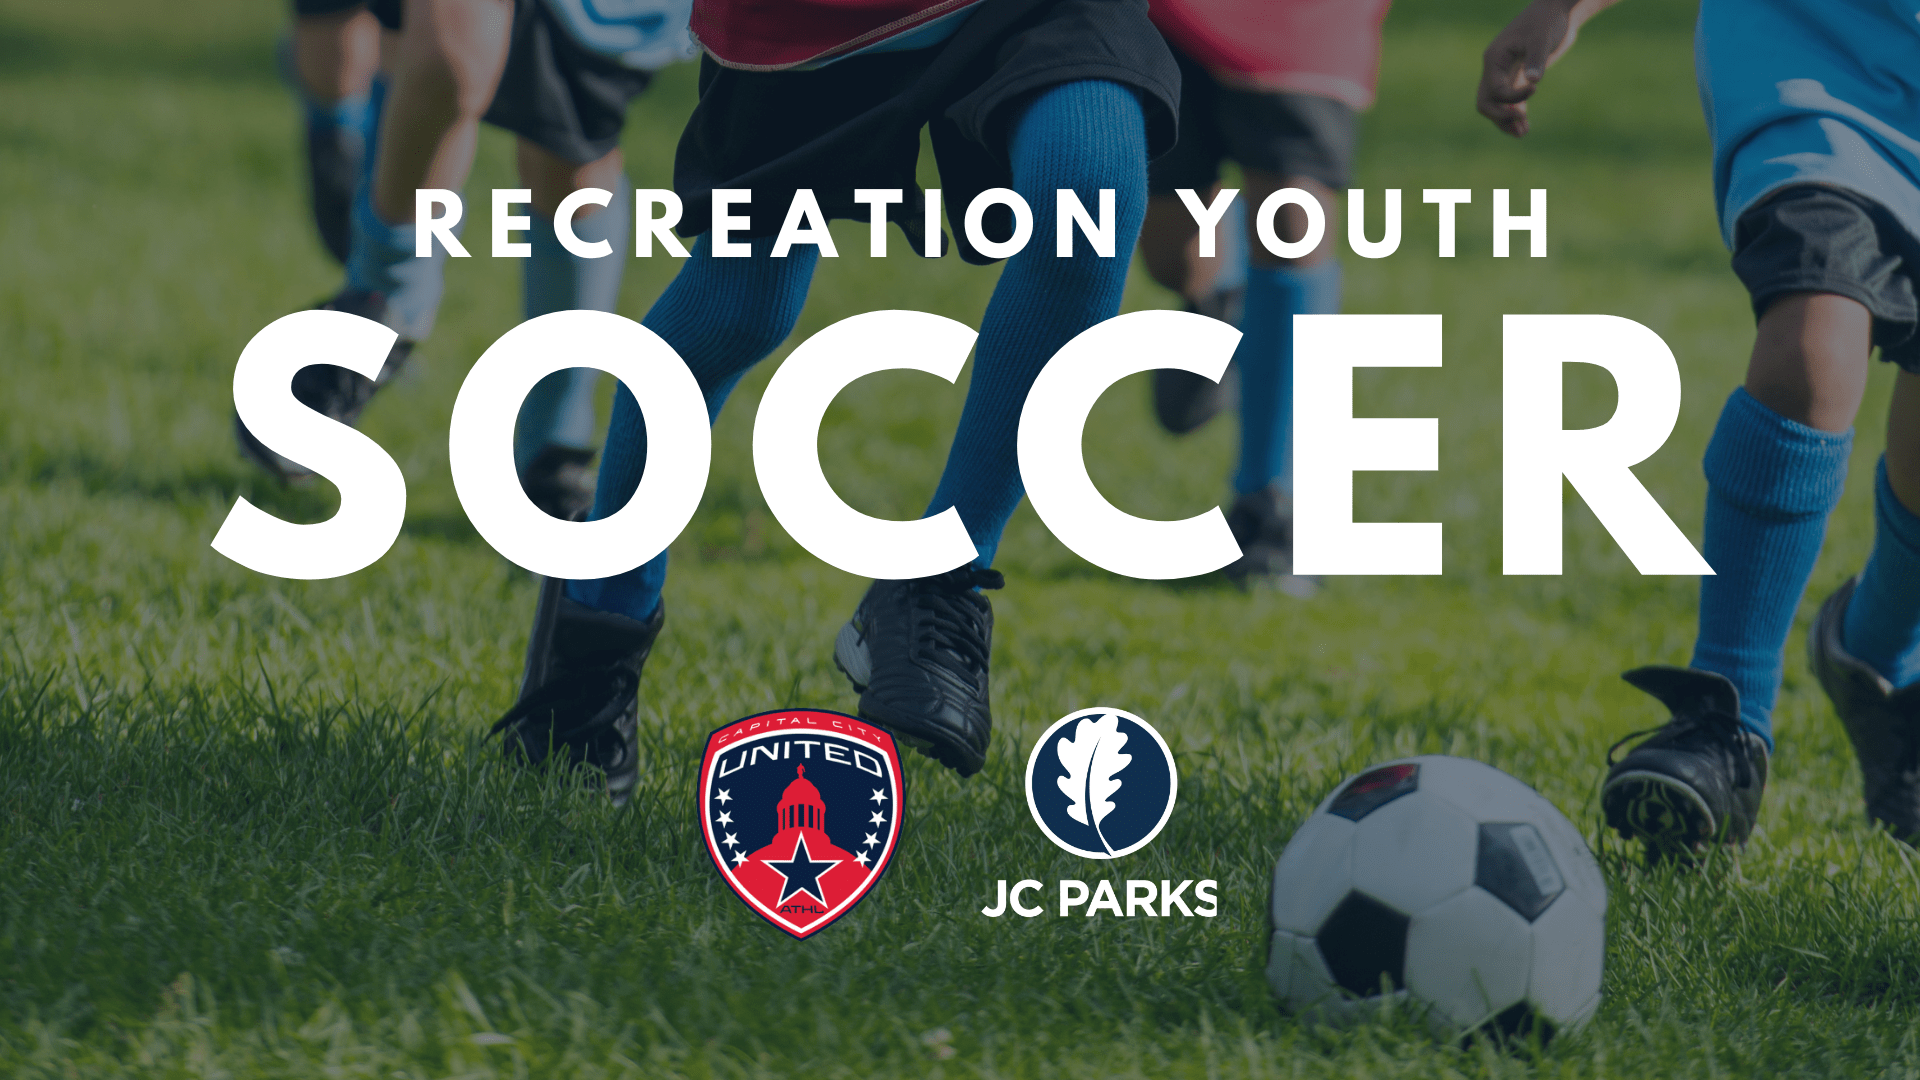 Recreation Youth Soccer with United Capital City Soccer and JC Parks and Rec